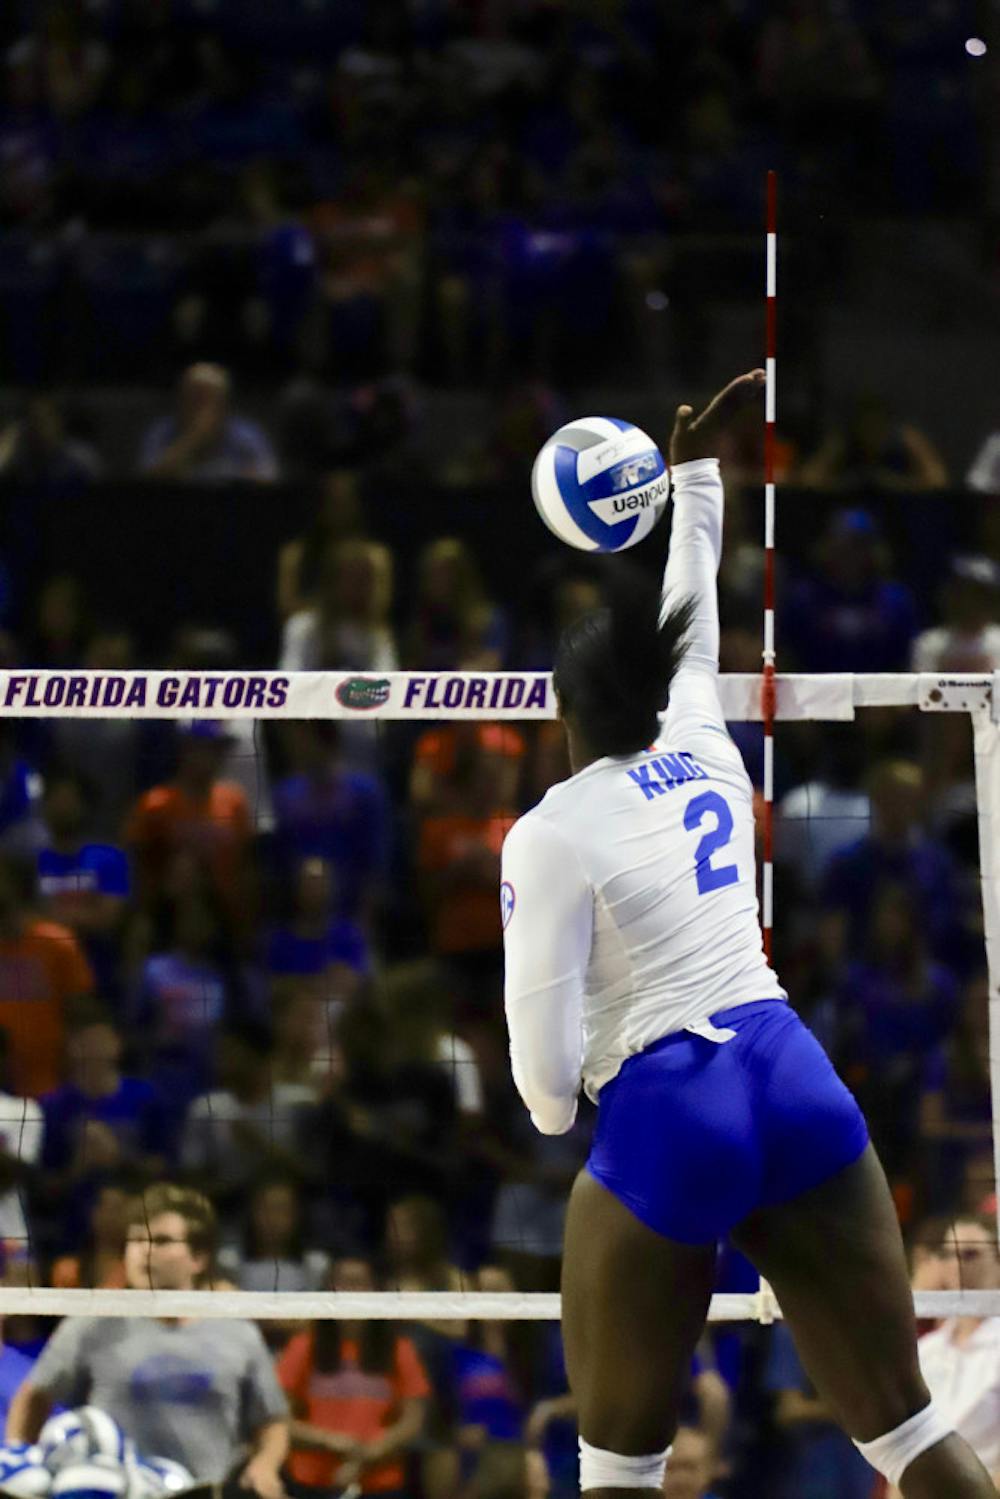 <p dir="ltr">Redshirt junior middle blocker Darrielle King played an integral role in Florida’s sweep weekend at home against South Florida, James Madison and Long Beach State. The 6-foot-3 attacker notched a career-high 15 kills against the Beach and tallied 25 on the weekend. She will be one of Florida’s key players when the team takes on the Seminoles at 6 p.m. on Tuesday. </p>